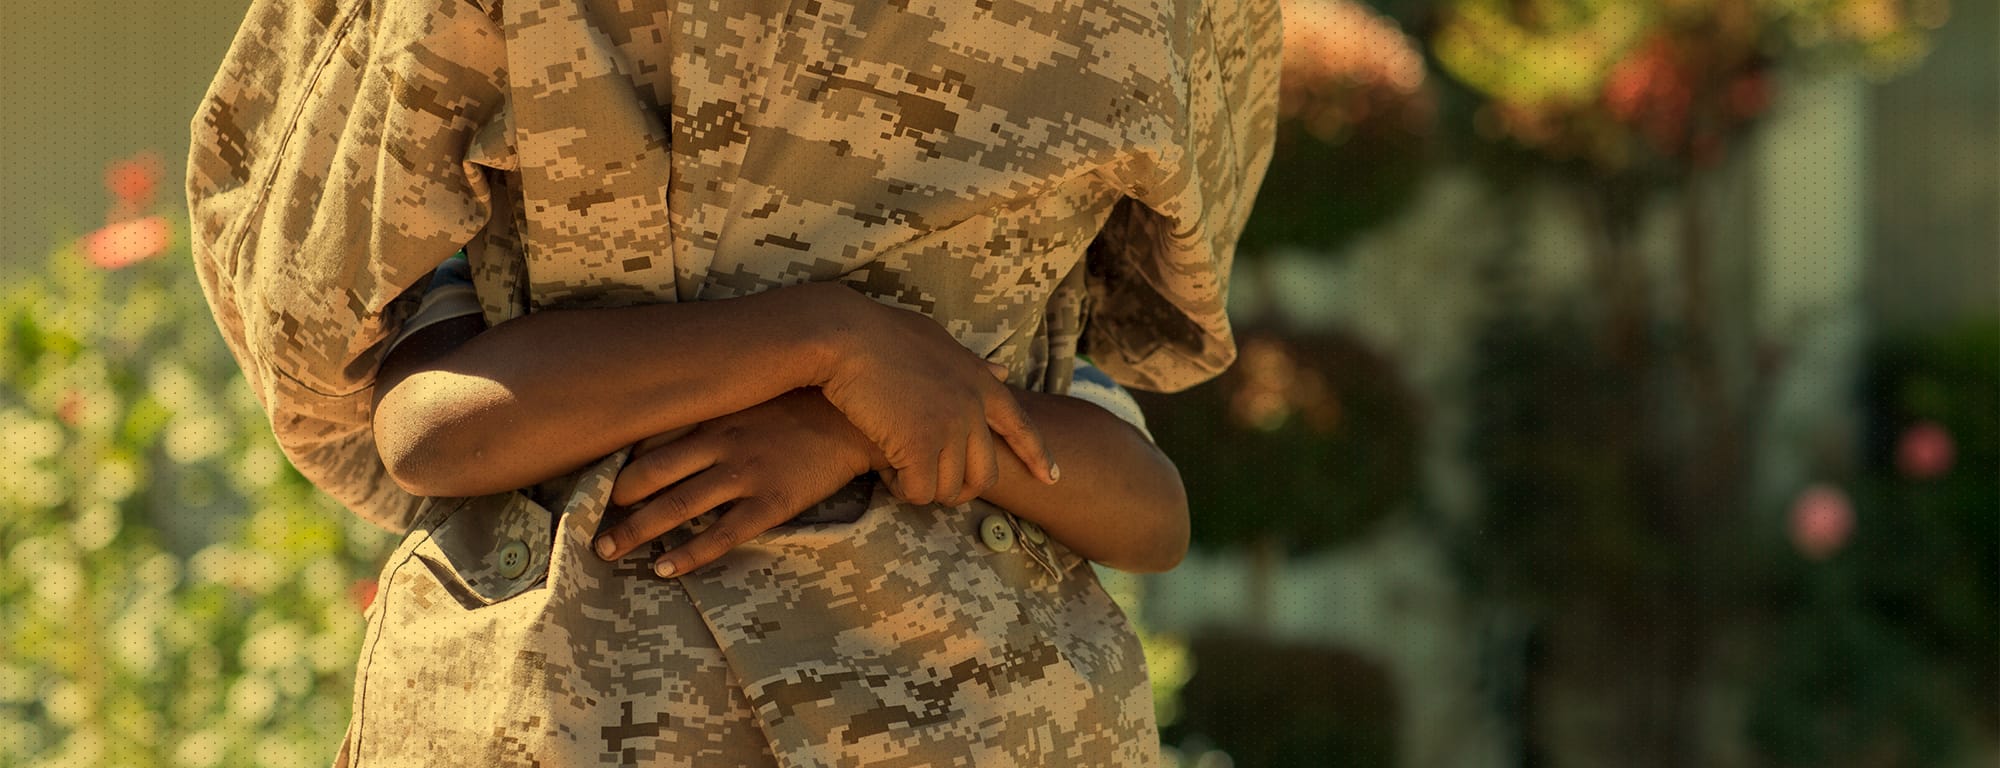 Adult in camouflage hugging child